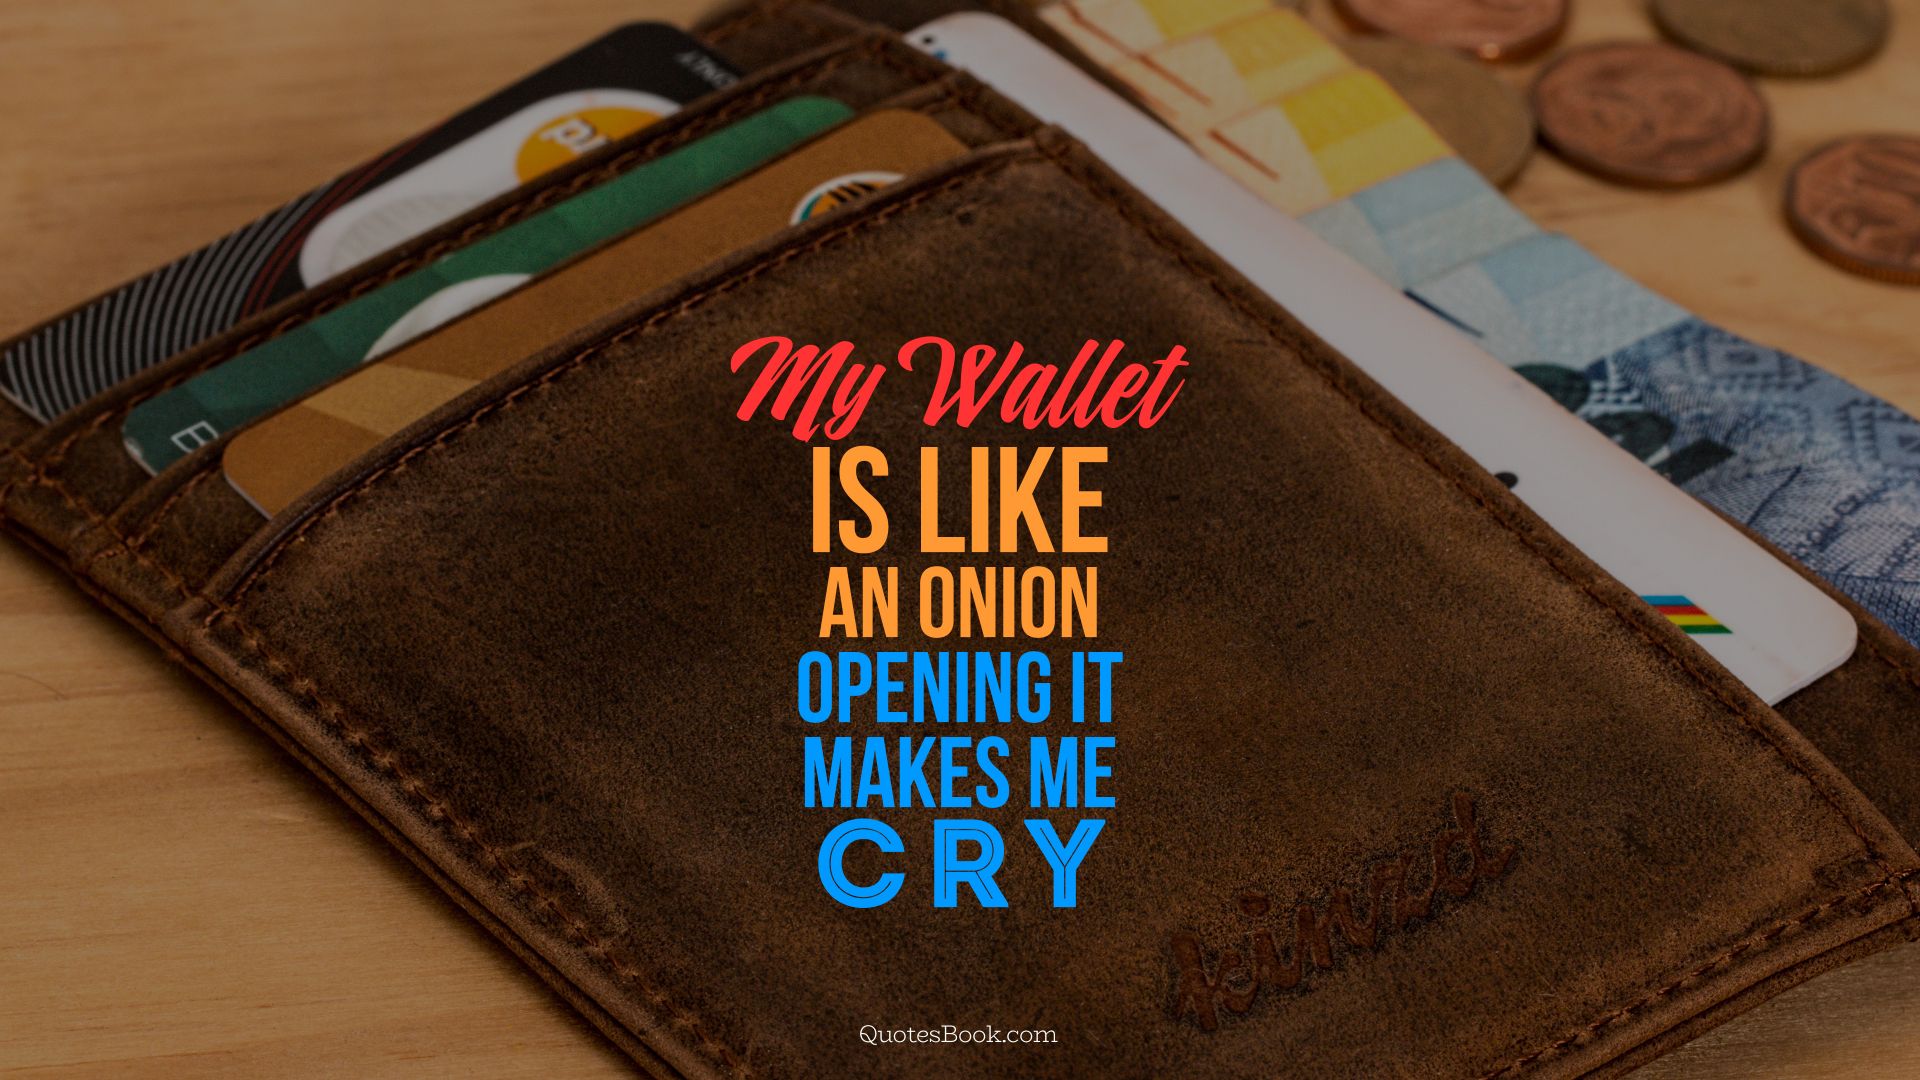 My wallet is like an onion, opening it makes me cry. - Quote by Jim Rohn